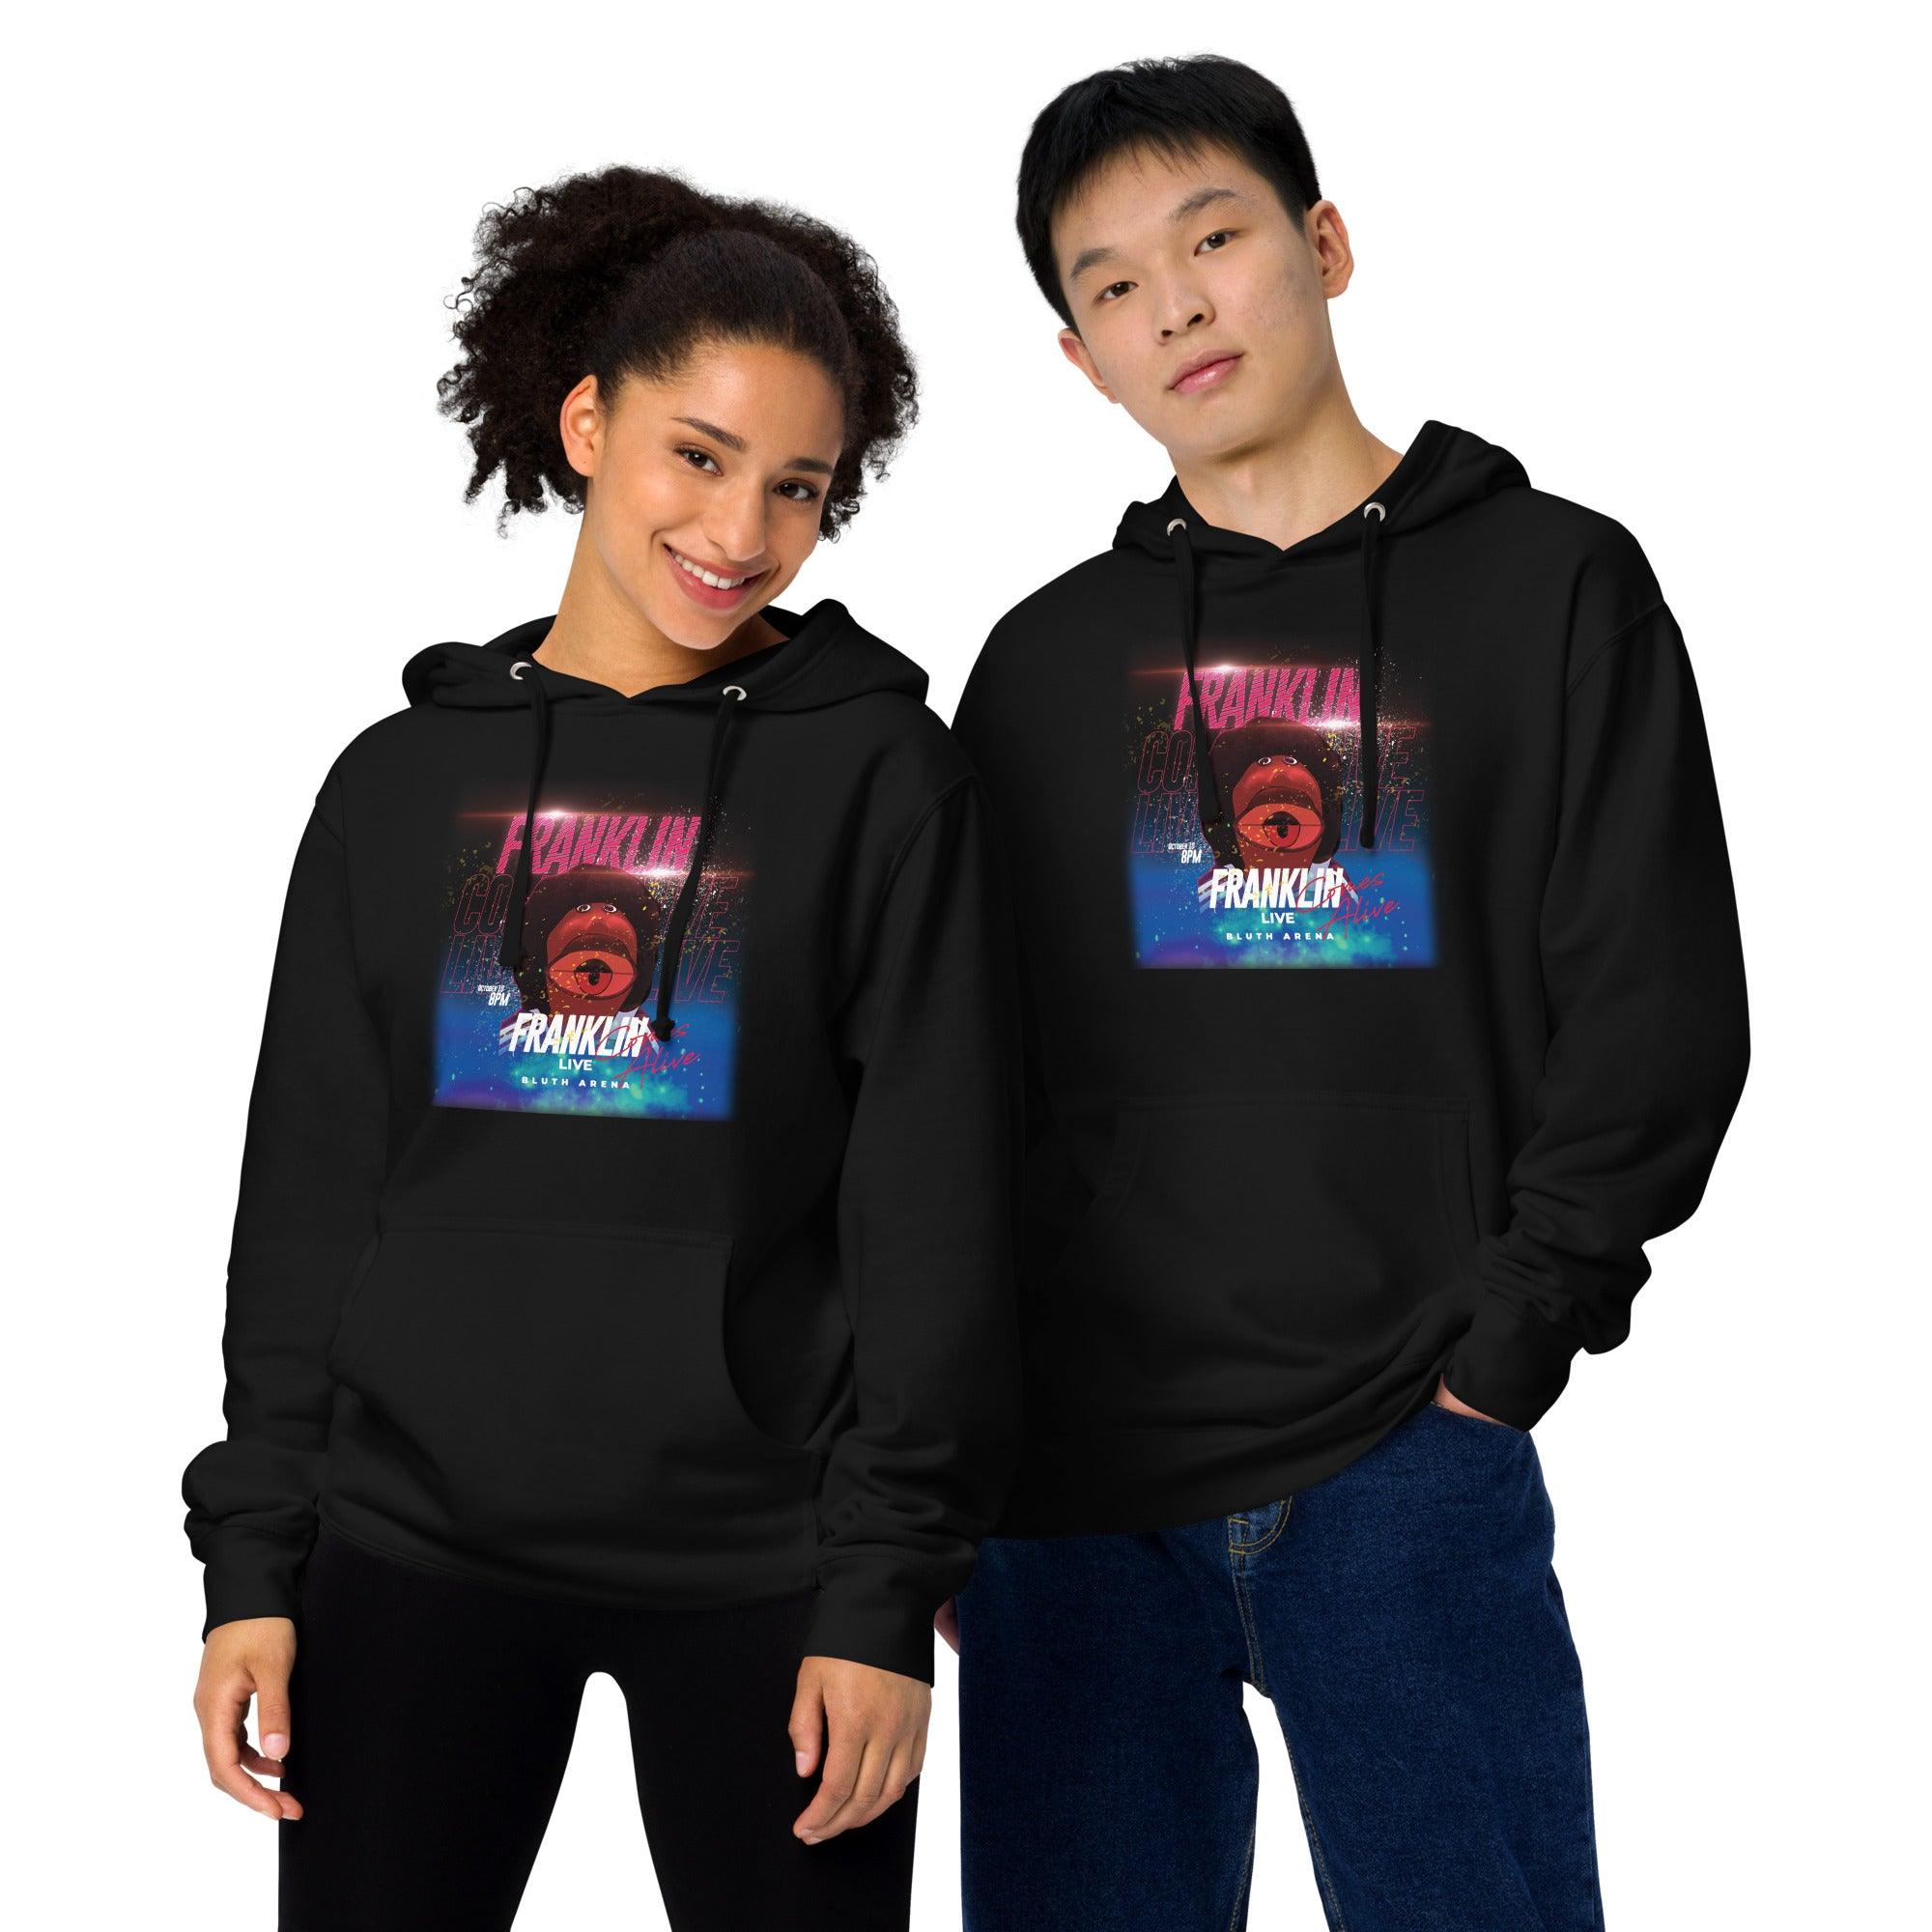 Franklin Comes Alive Live Unisex midweight hoodie